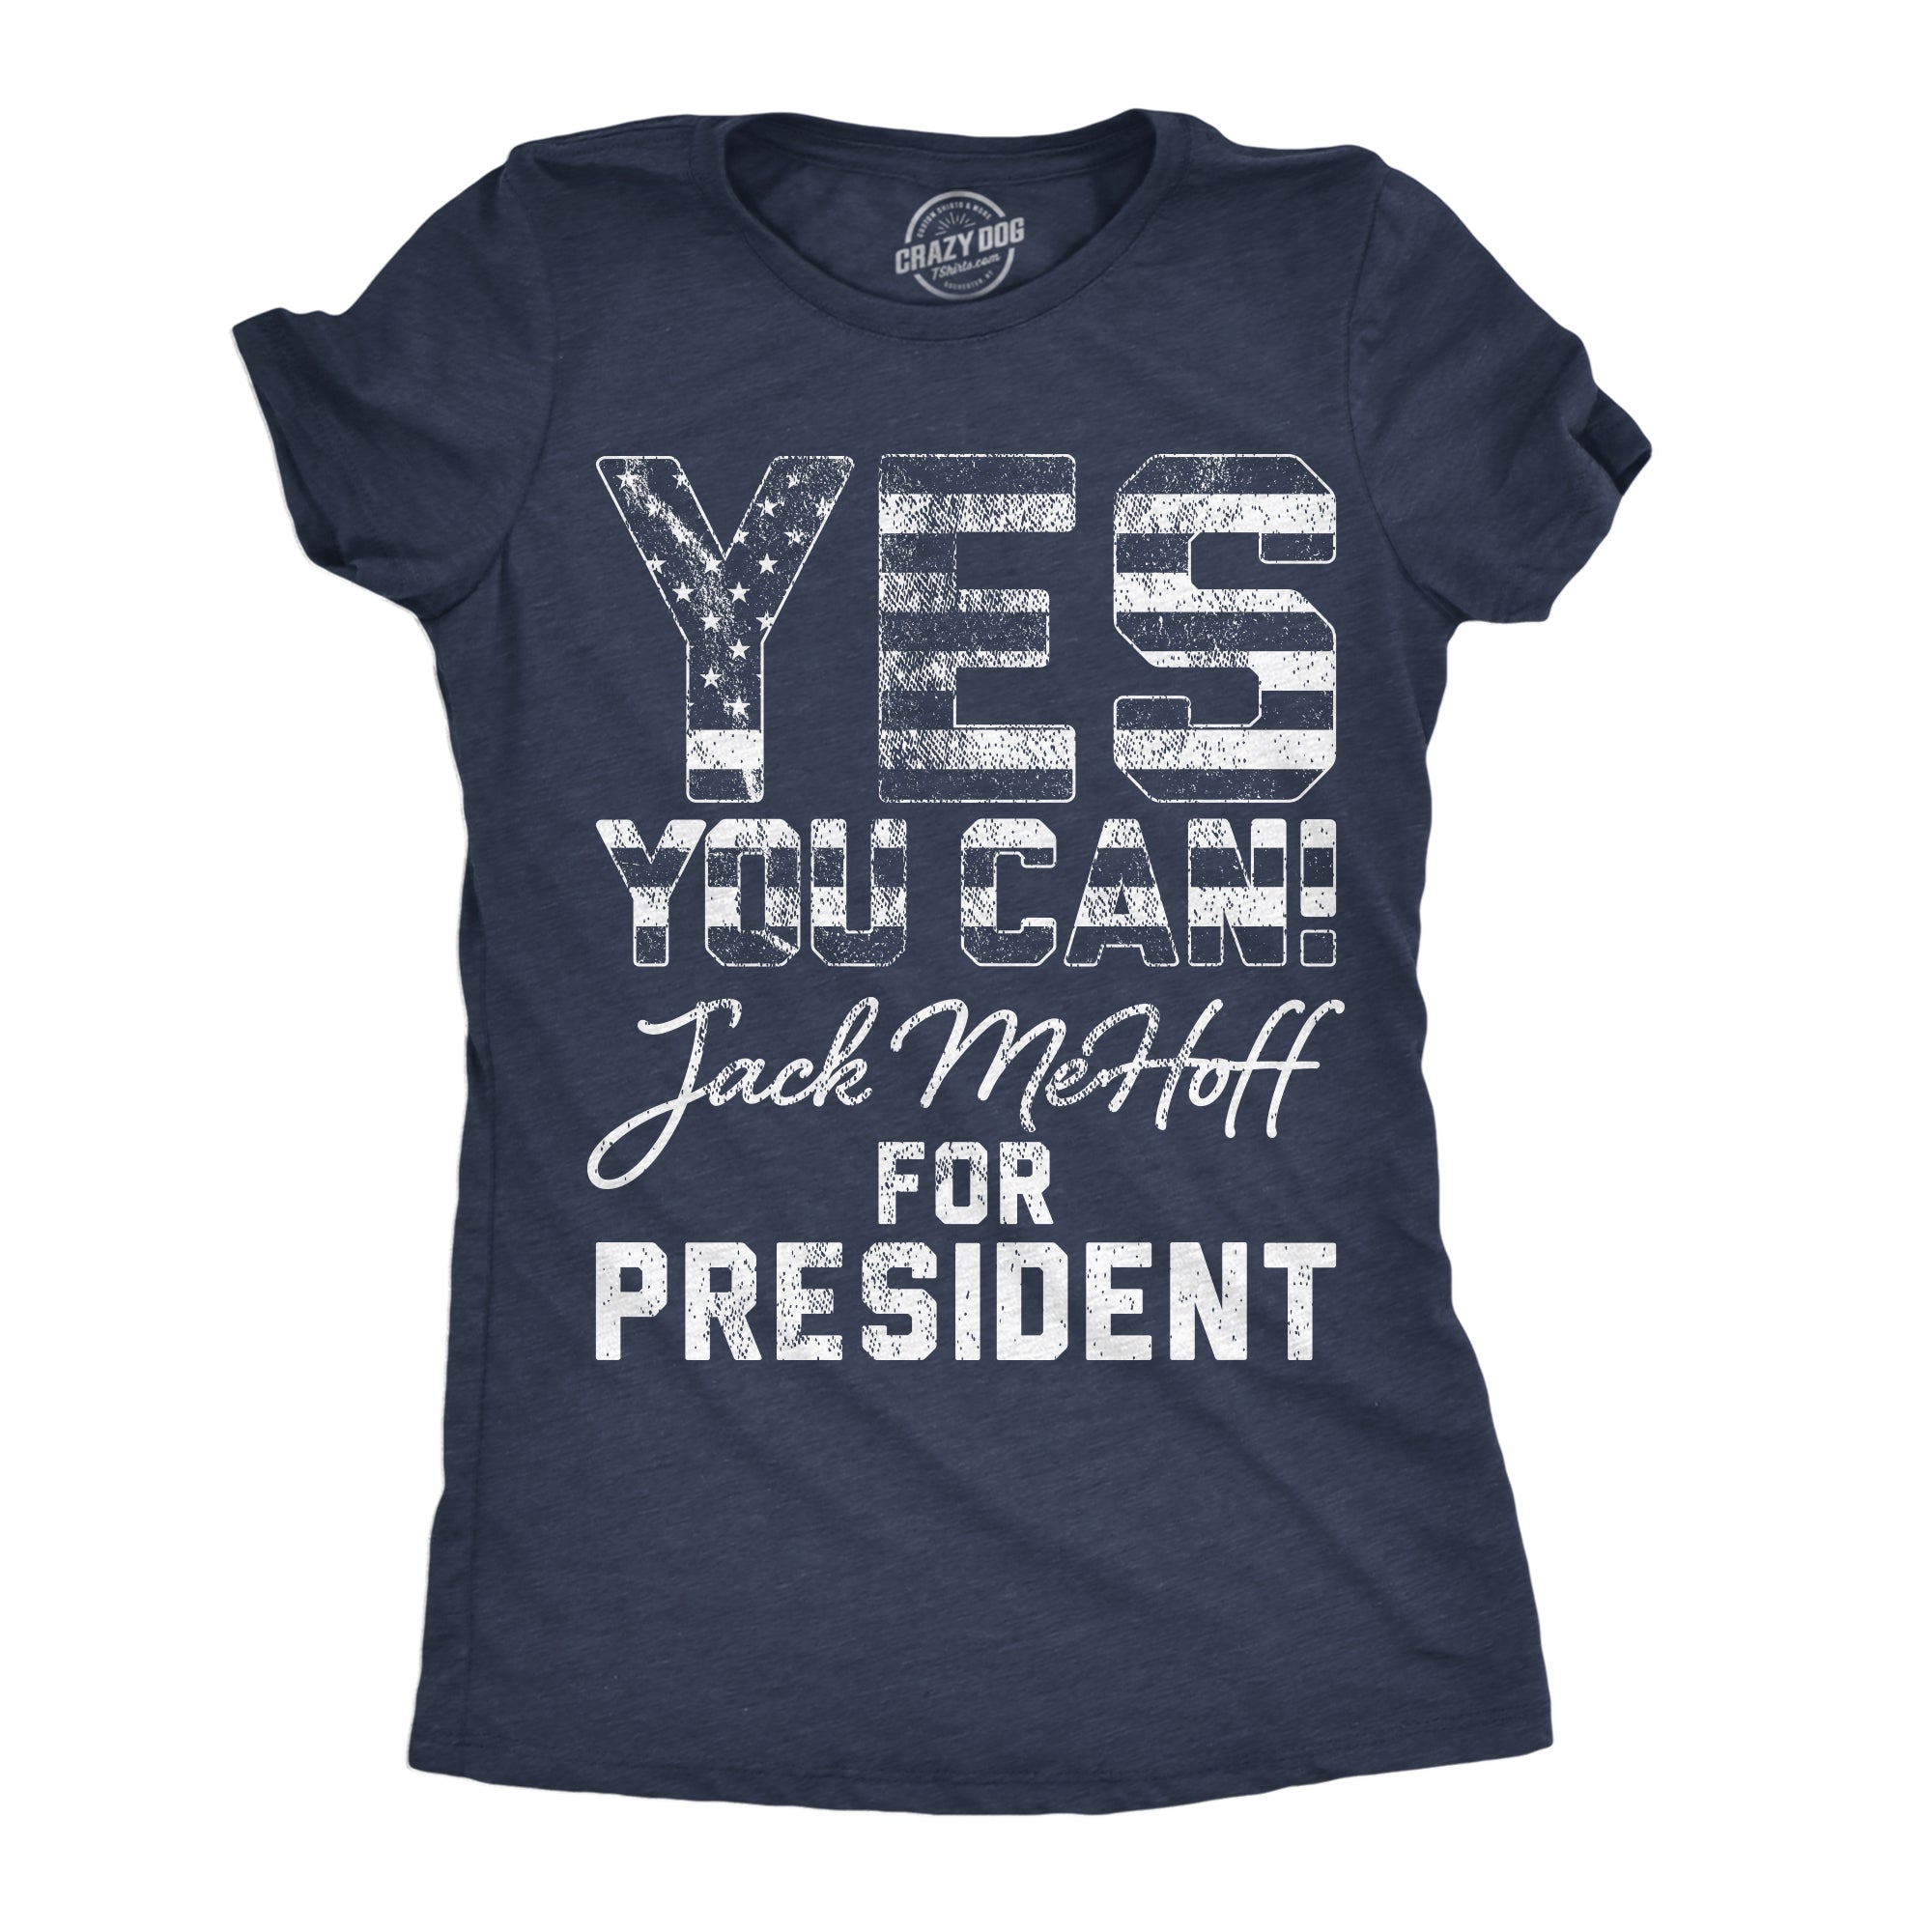 Funny Heather Navy - Yes You Can Jack MeHoff For President Yes You Can Jack MeHoff For President Womens T Shirt Nerdy Political sarcastic sex Tee